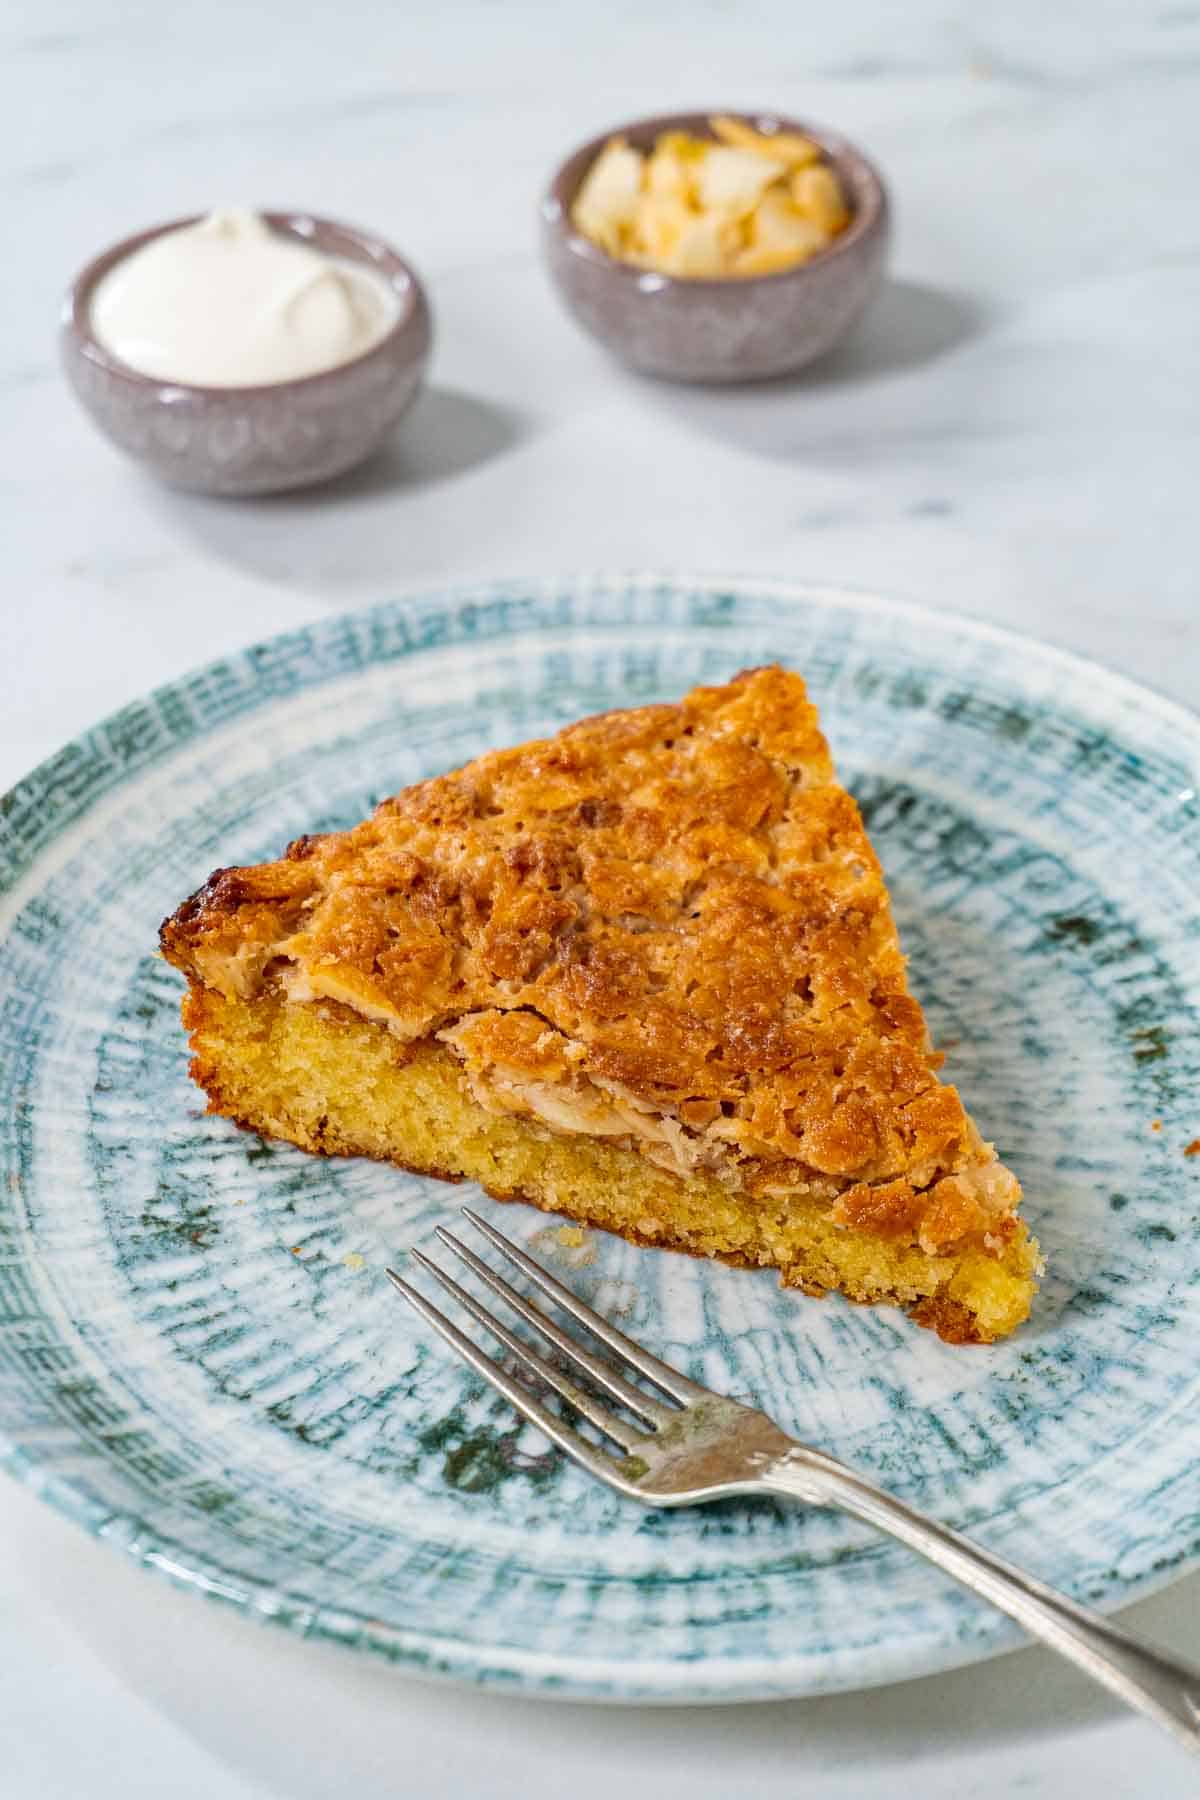 Swedish almond cake on a plate with a fork next to it.